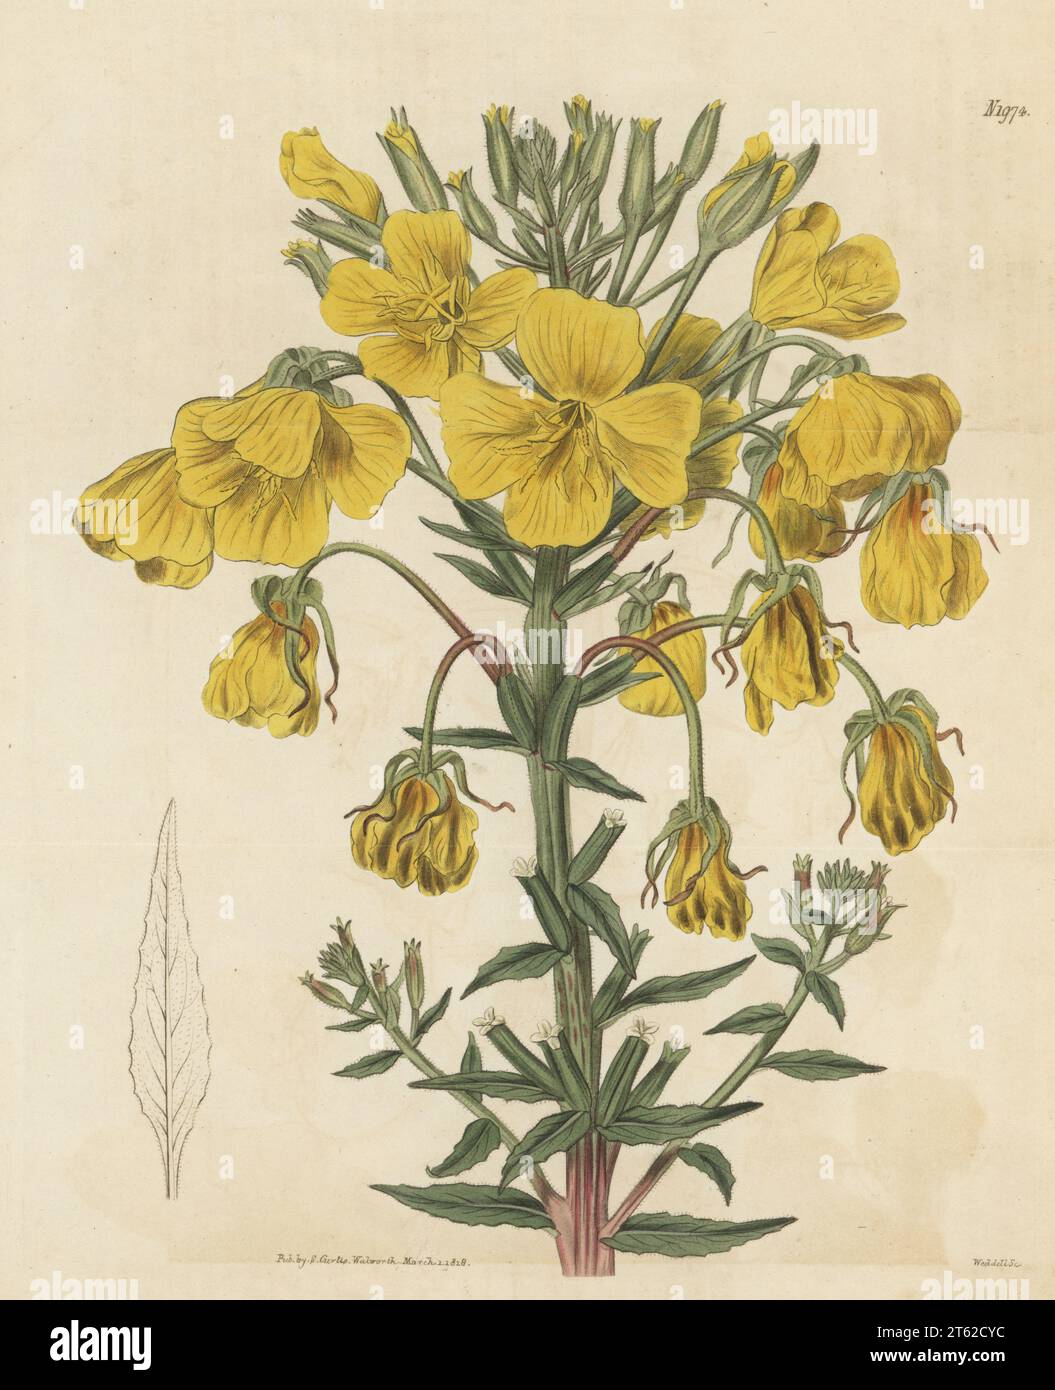 Hooker's evening primrose, Oenothera elata subsp. hirsutissima. Raised from seeds sent from Mexico by gardener Thomas Ashworth at Longleats for the Marquis of Bath. Corymbose oenothera or evening primrose, Oenothera corymbosa. Handcoloured copperplate engraving by Weddell after a botanical illustration by an unknown artist from Curtis’s Botanical Magazine, edited by John Sims, London, 1818. Stock Photo